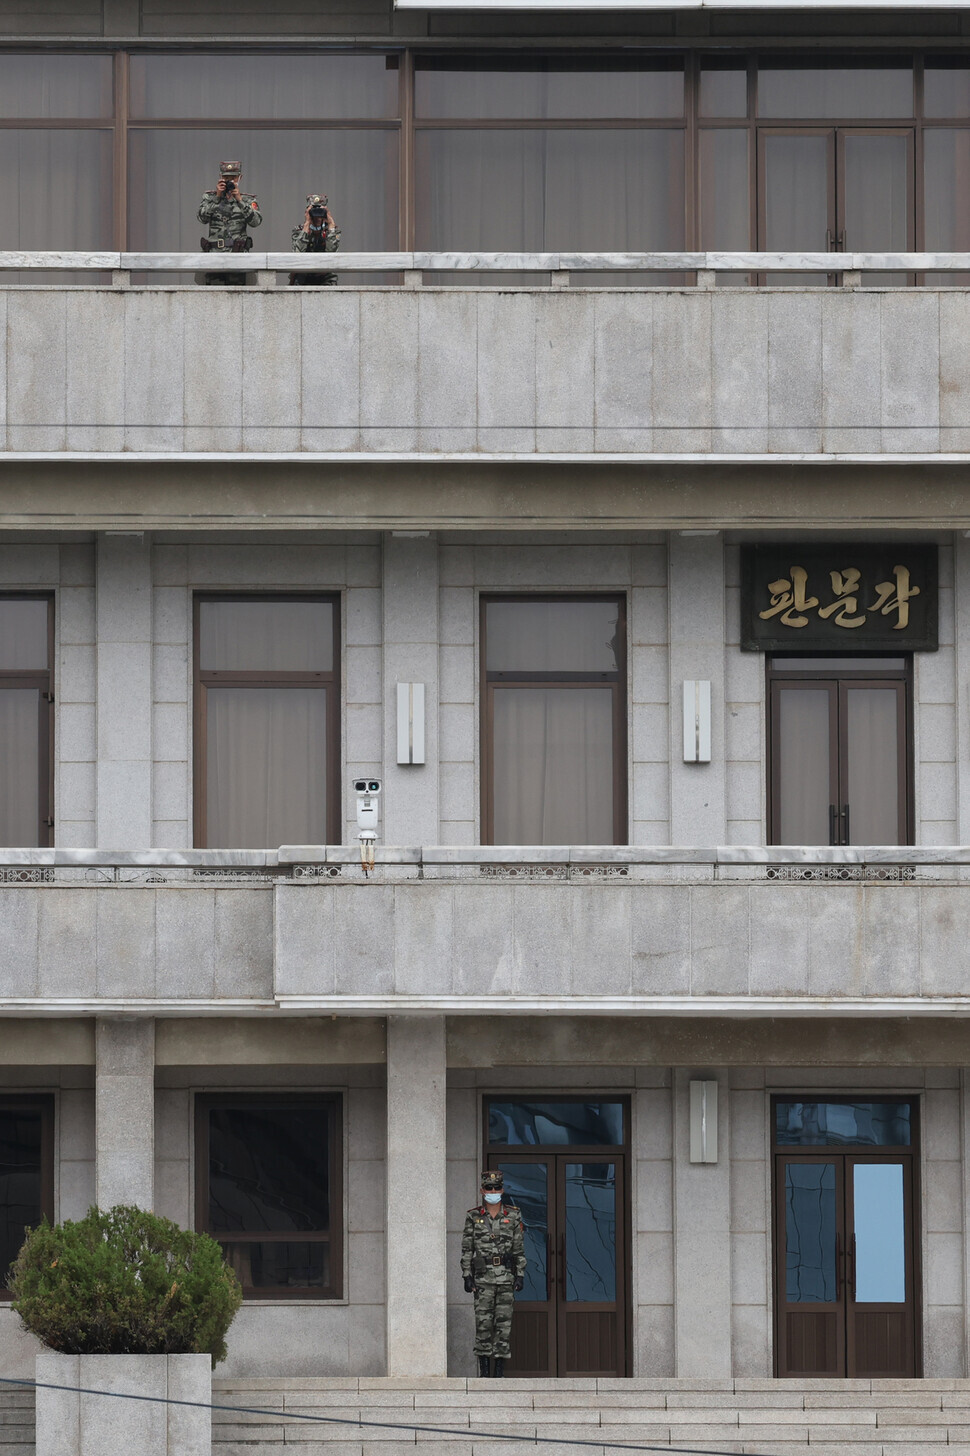 North Korean soldiers with a camera and binoculars peer over the balcony of Panmungak at the JSA. (Kim Hye-yun/The Hankyoreh)